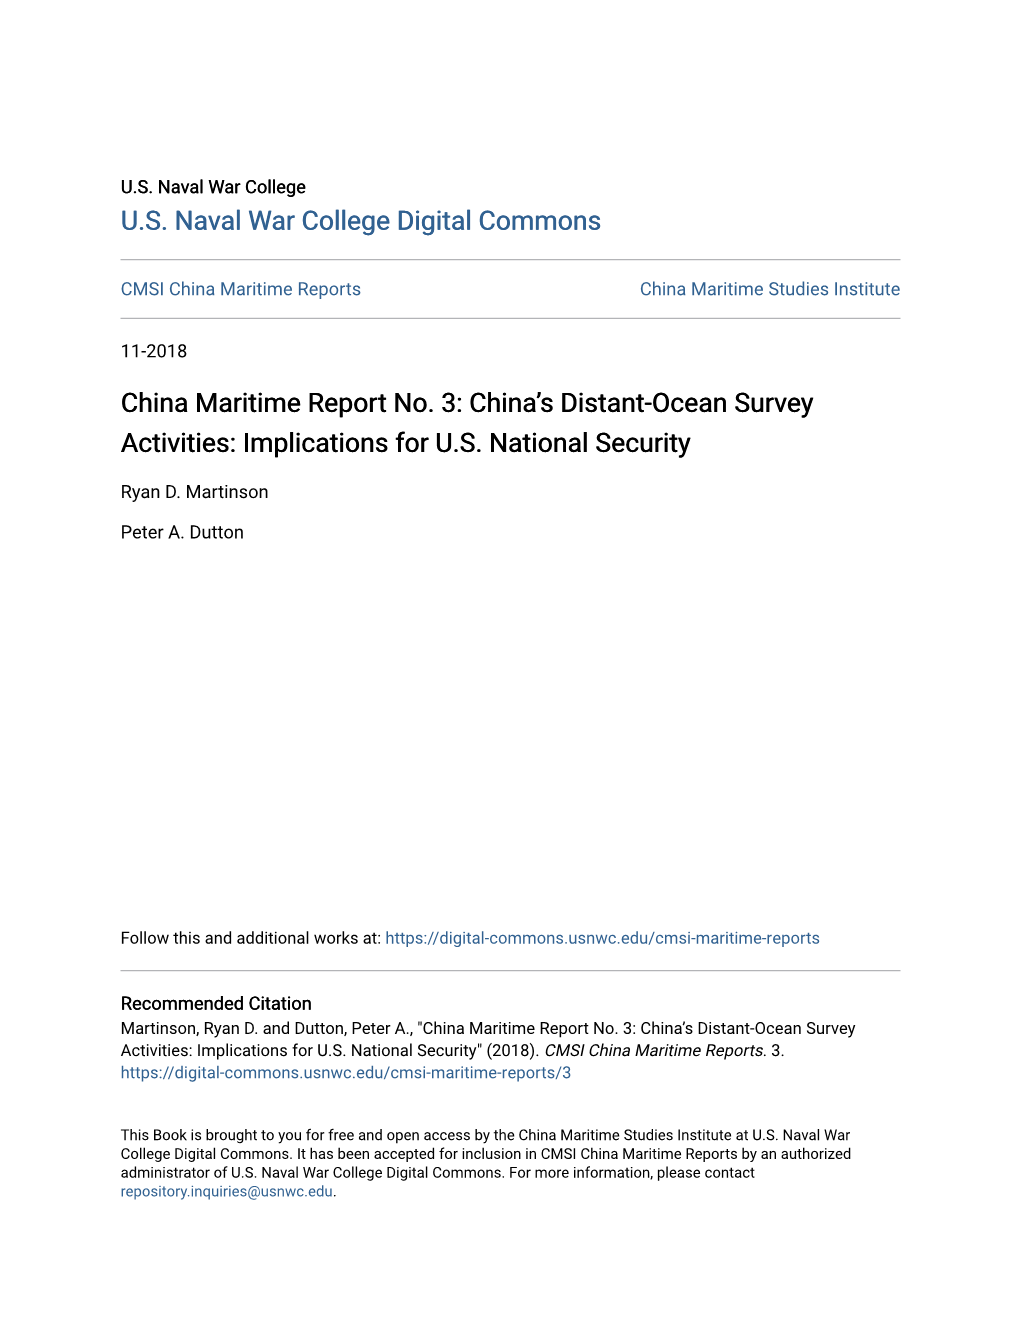 China Maritime Report No. 3: China’S Distant-Ocean Survey Activities: Implications for U.S